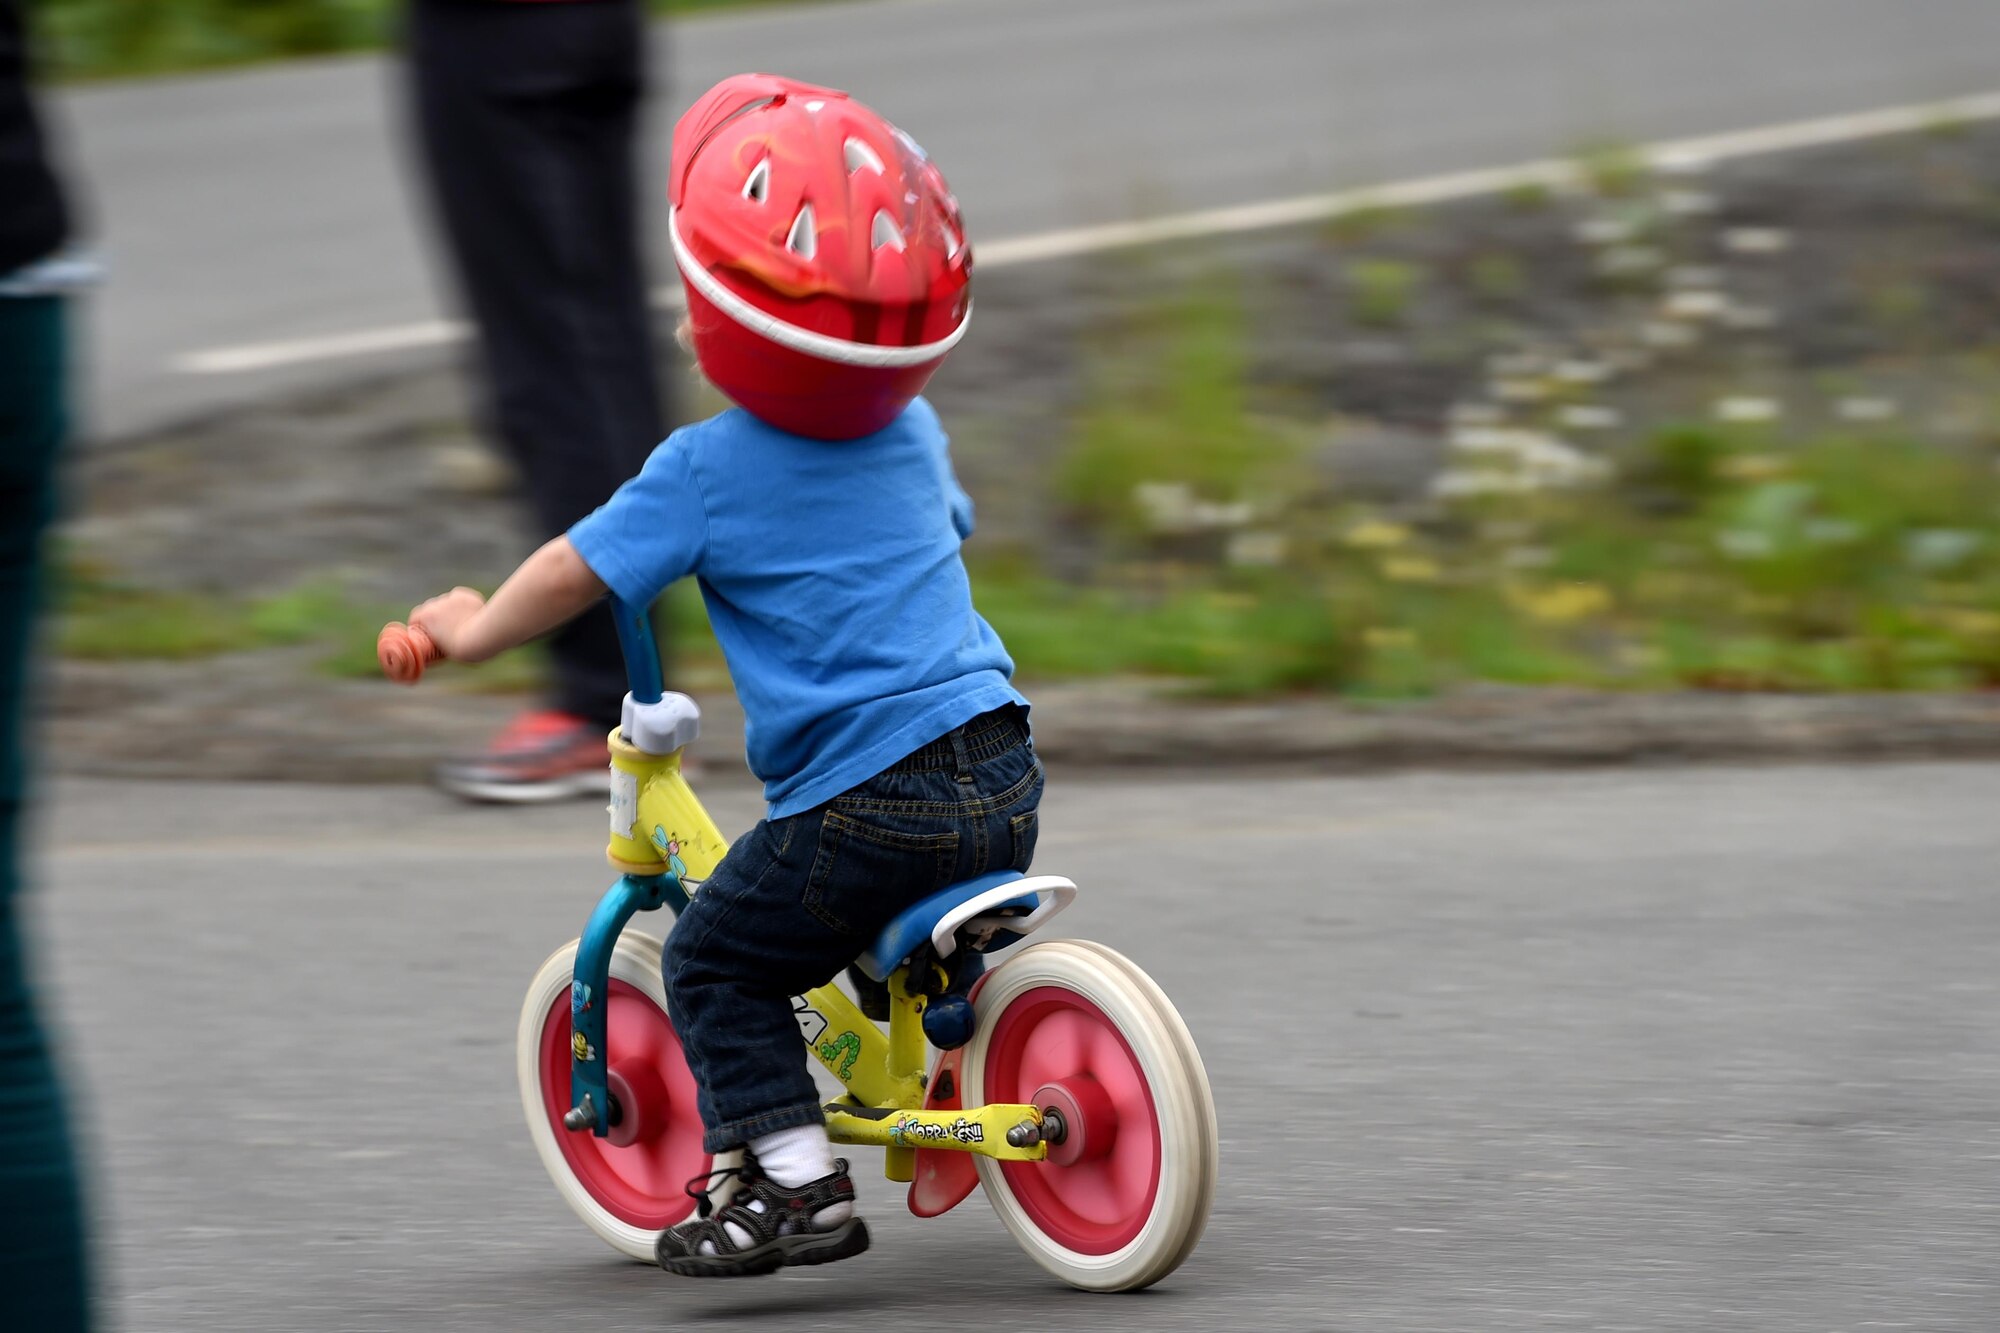 Maddox Neff, 2, pushes himself on his bike as spectators await the return of cyclists during the Moose Run time-trial race at Joint Base Elmendorf-Richardson, Alaska, Aug. 3, 2017. For more than 15 years, the club has hosted road race events at JBER.